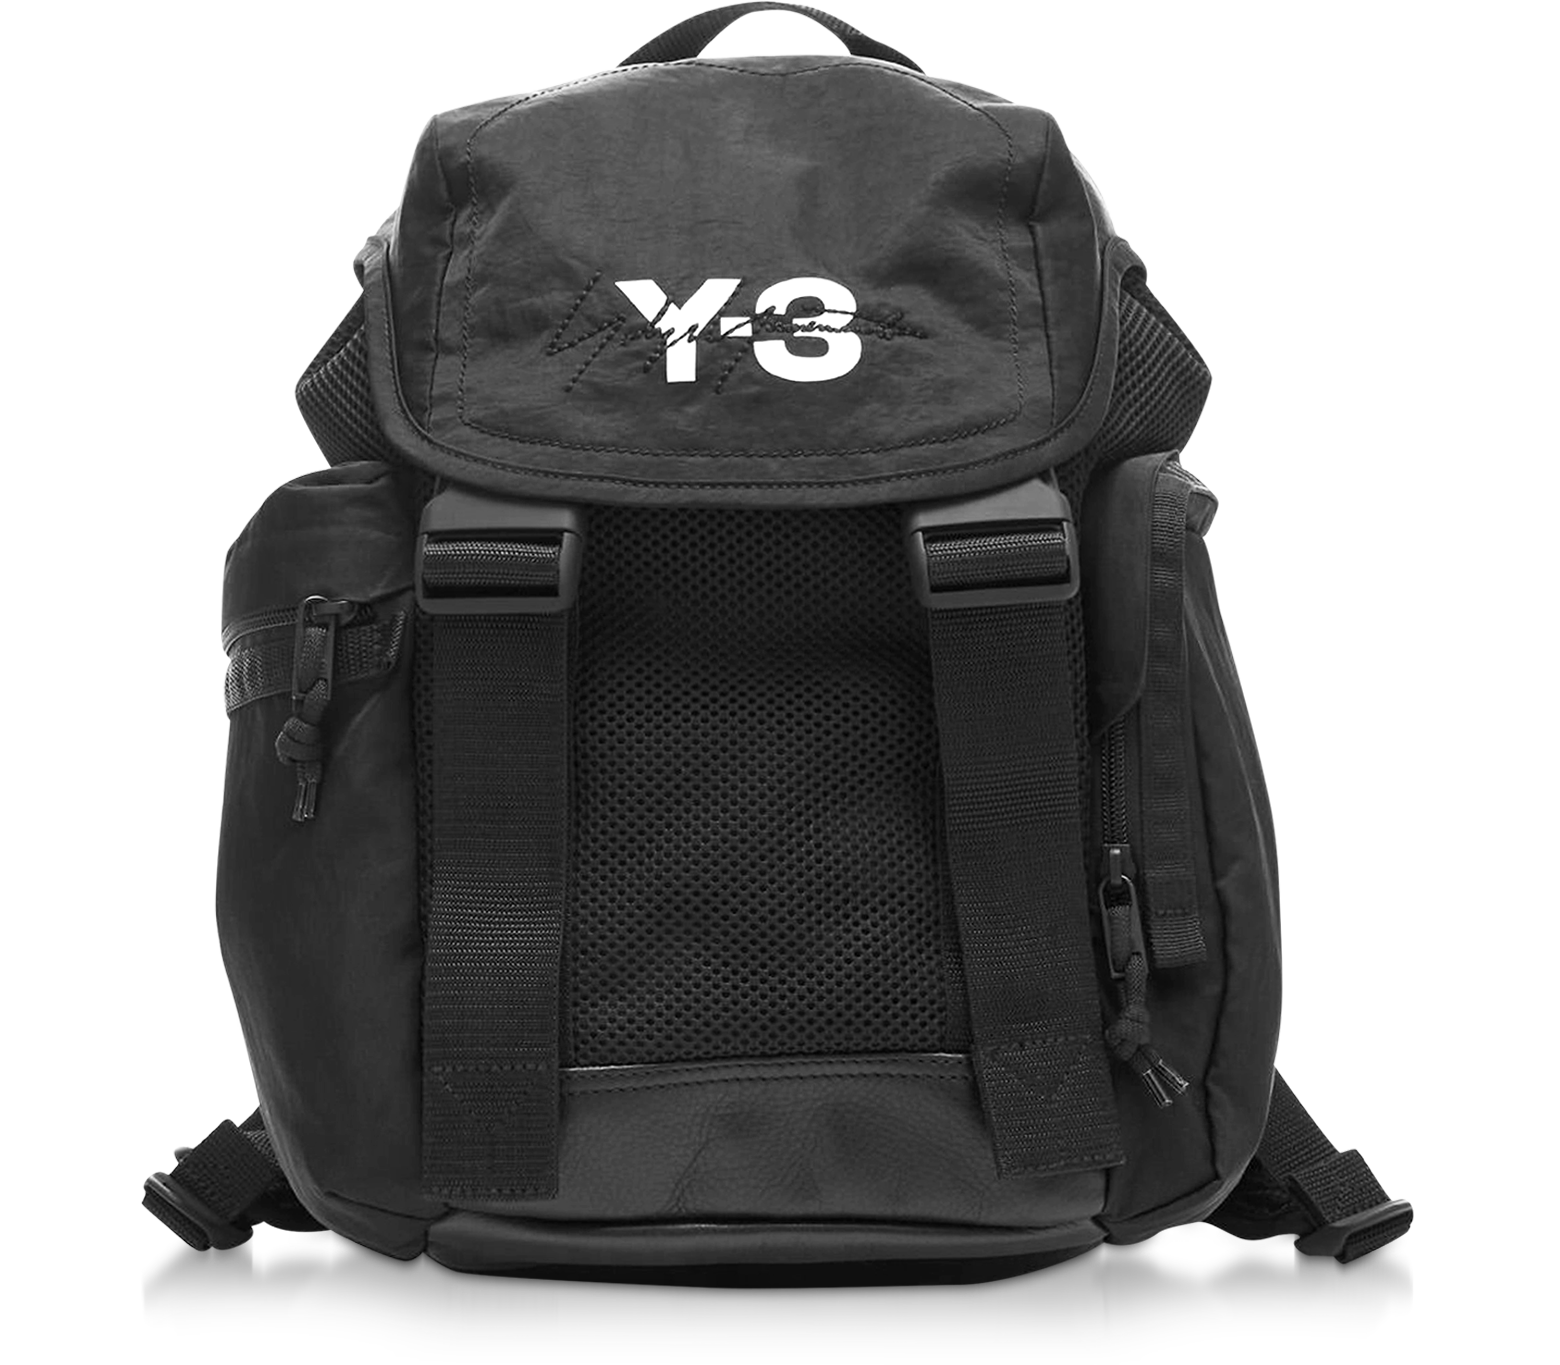 y3 mobility backpack